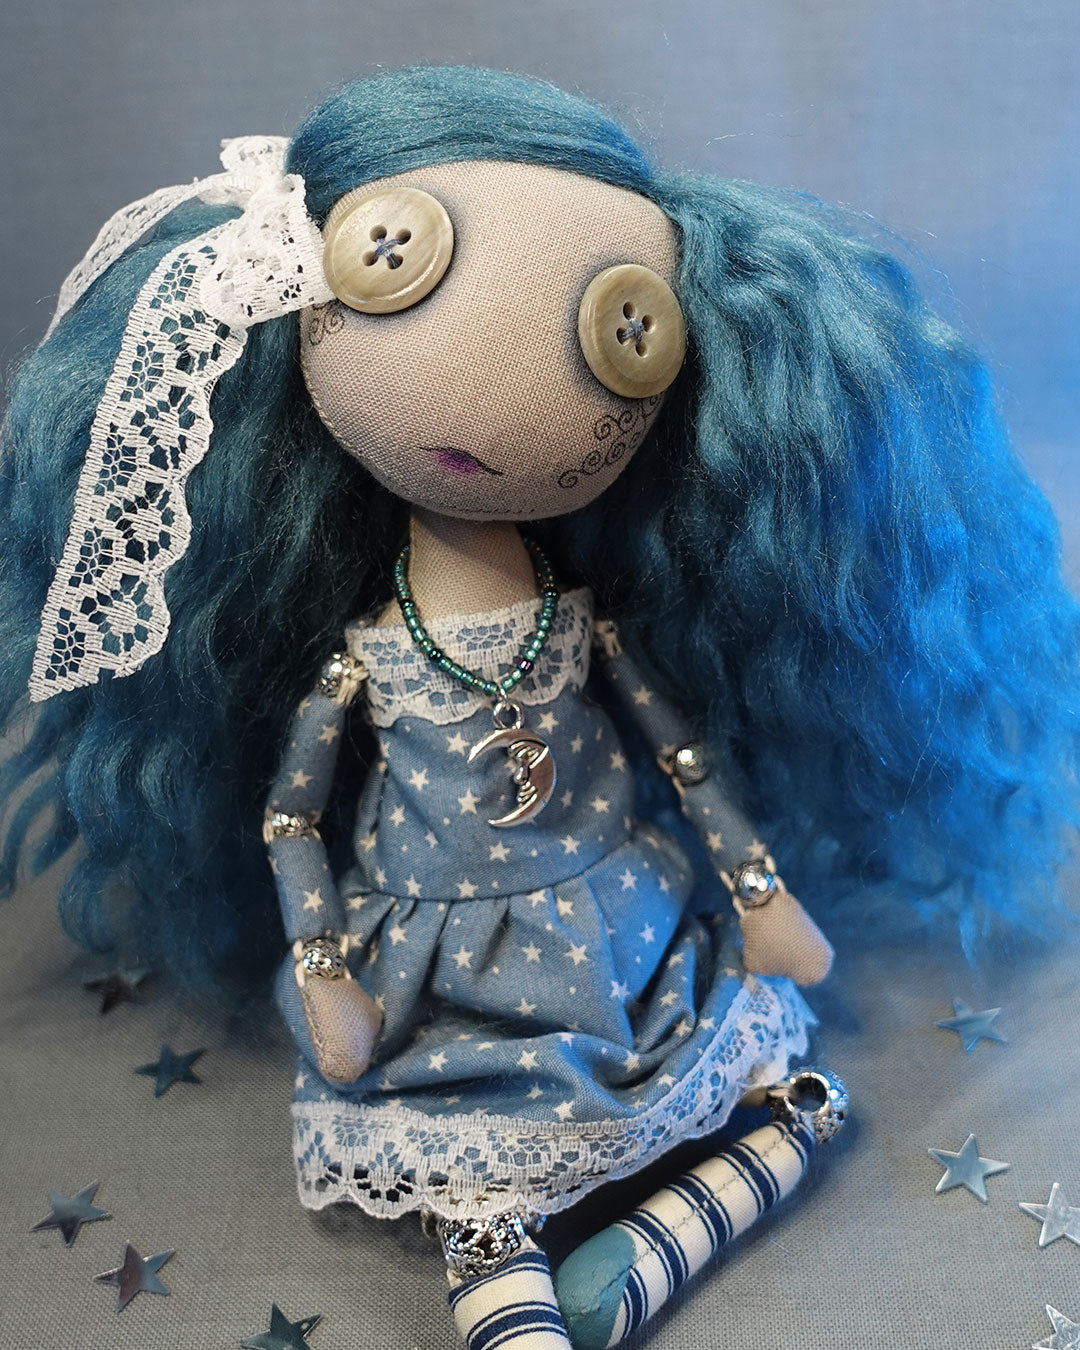 a button eyed cloth art doll with blue hair in star print dress